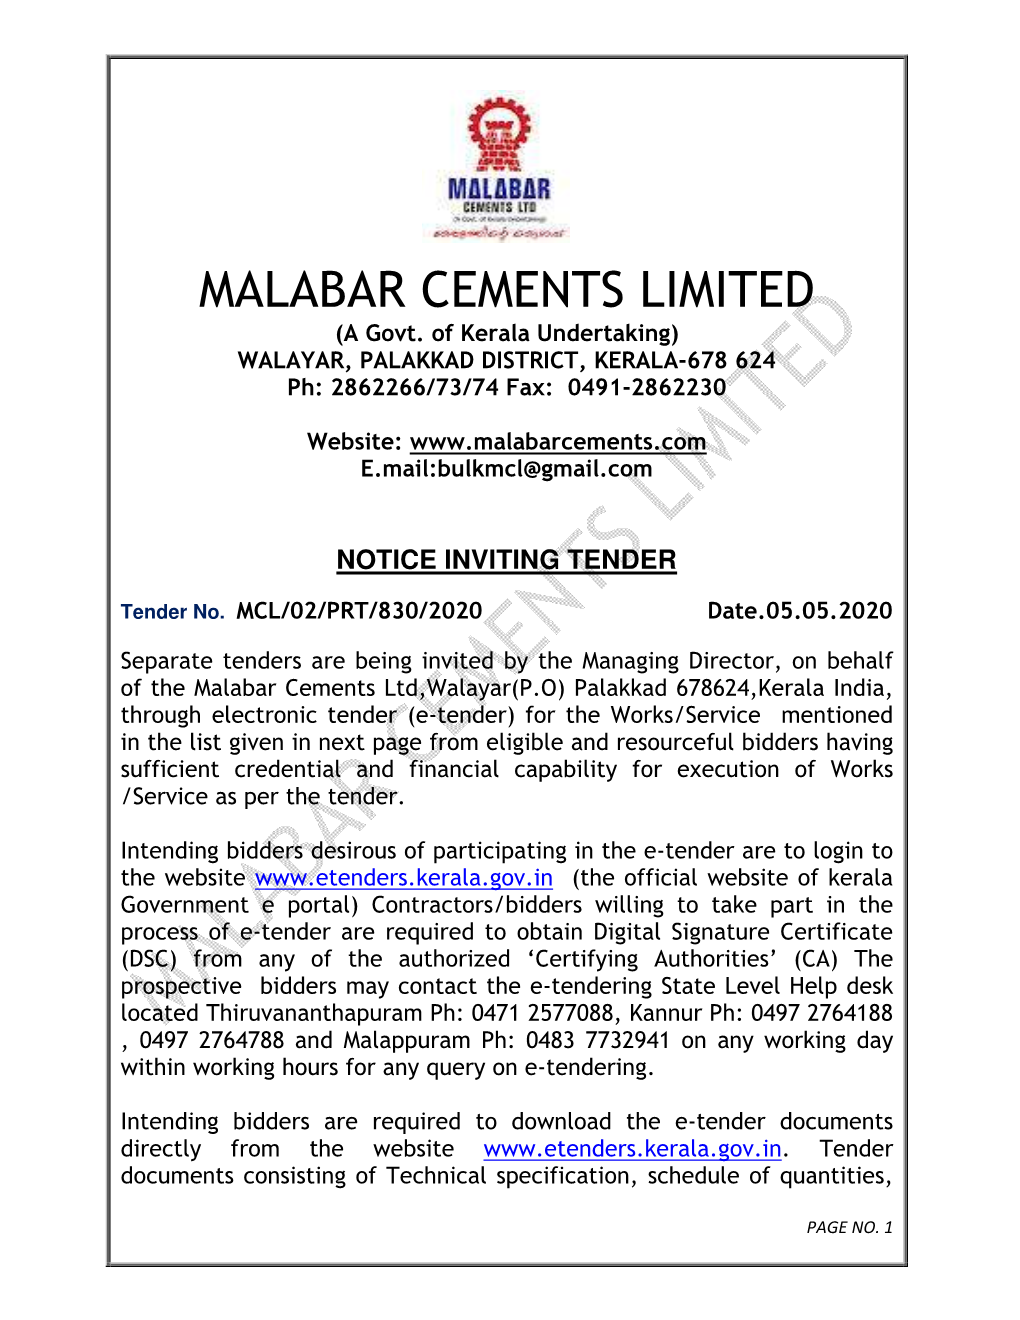 MALABAR CEMENTS LIMITED (A Govt